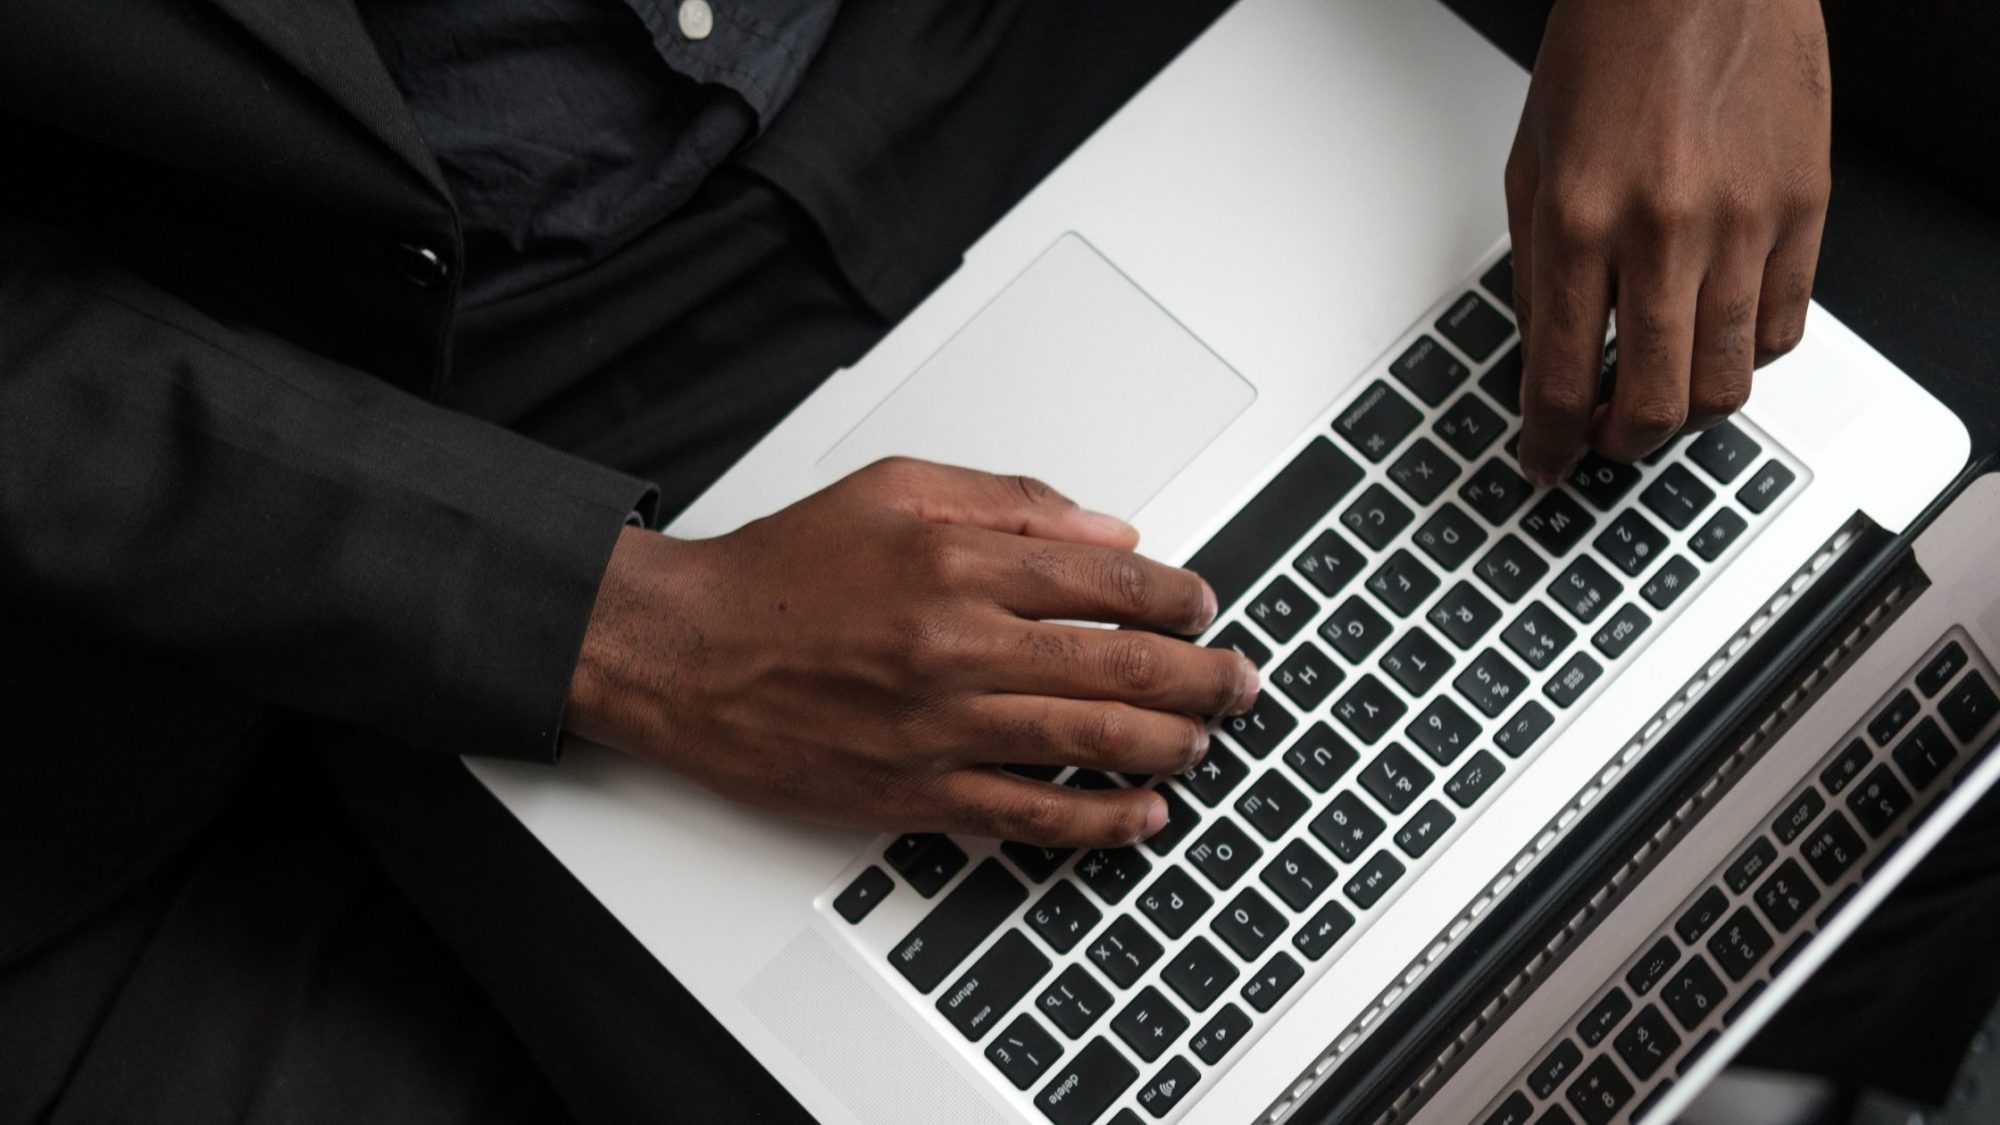 A person wearing a black jacket types on a laptop keyboard, likely reviewing IT policies. 